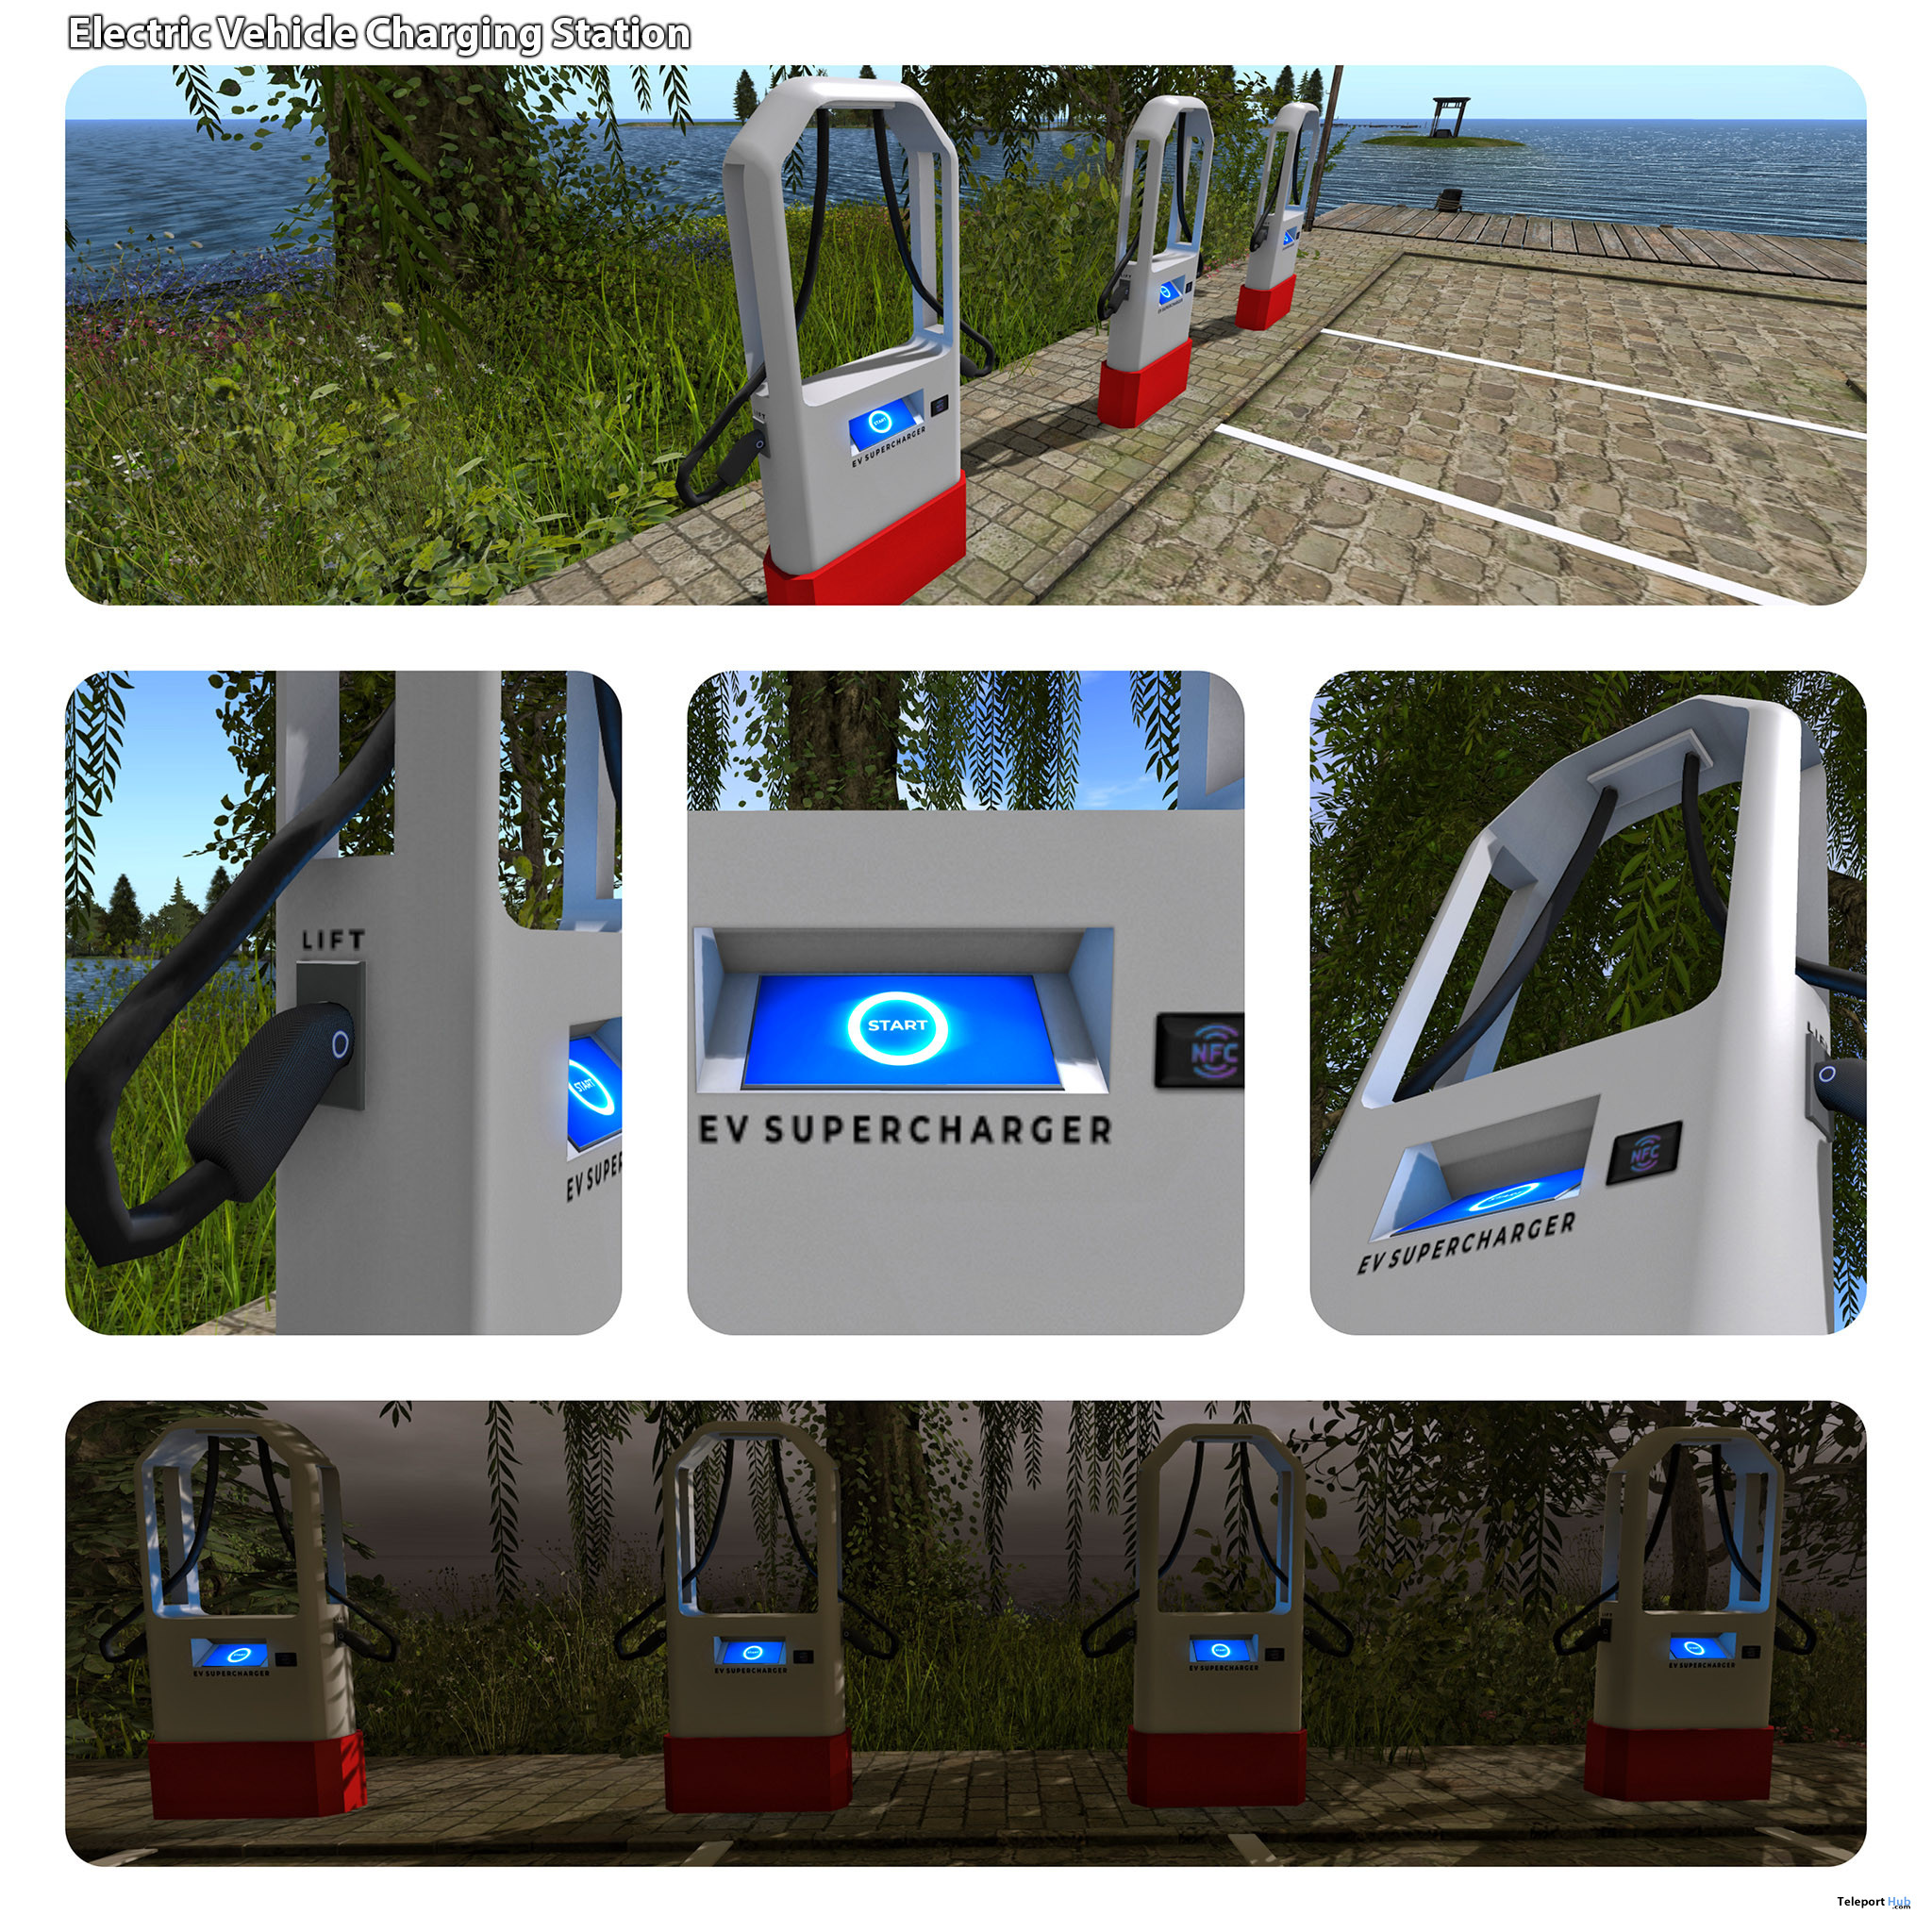 New Release: Electric Vehicle Charging Station by [satus Inc] - Teleport Hub - teleporthub.com